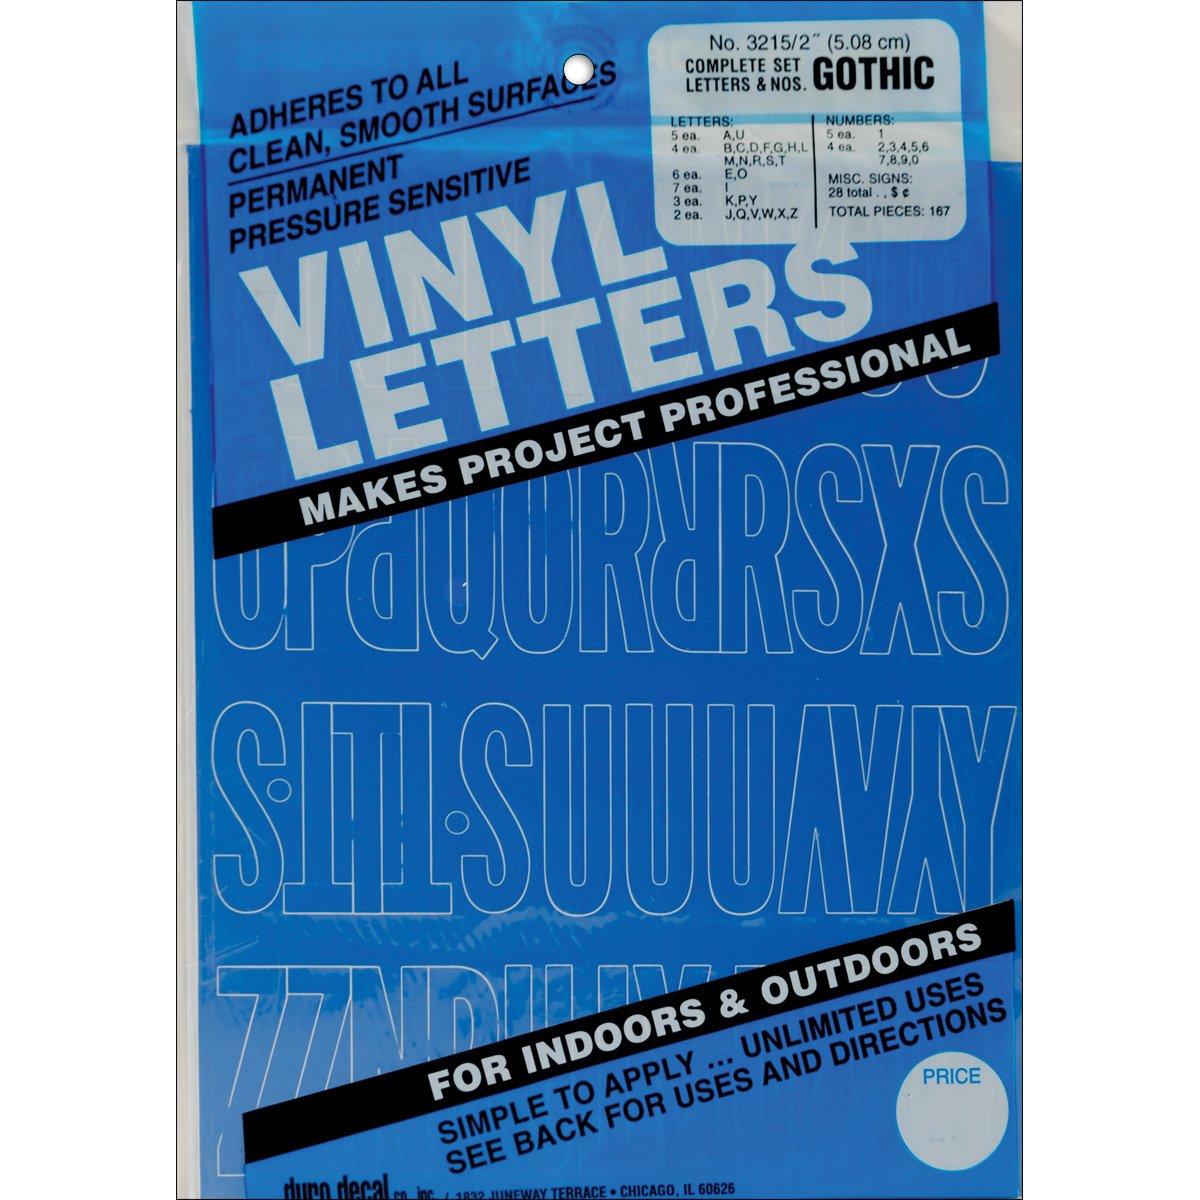 Graphic Products Duro 2-inch Gothic Vinyl Letters and Numbers Set, Blue